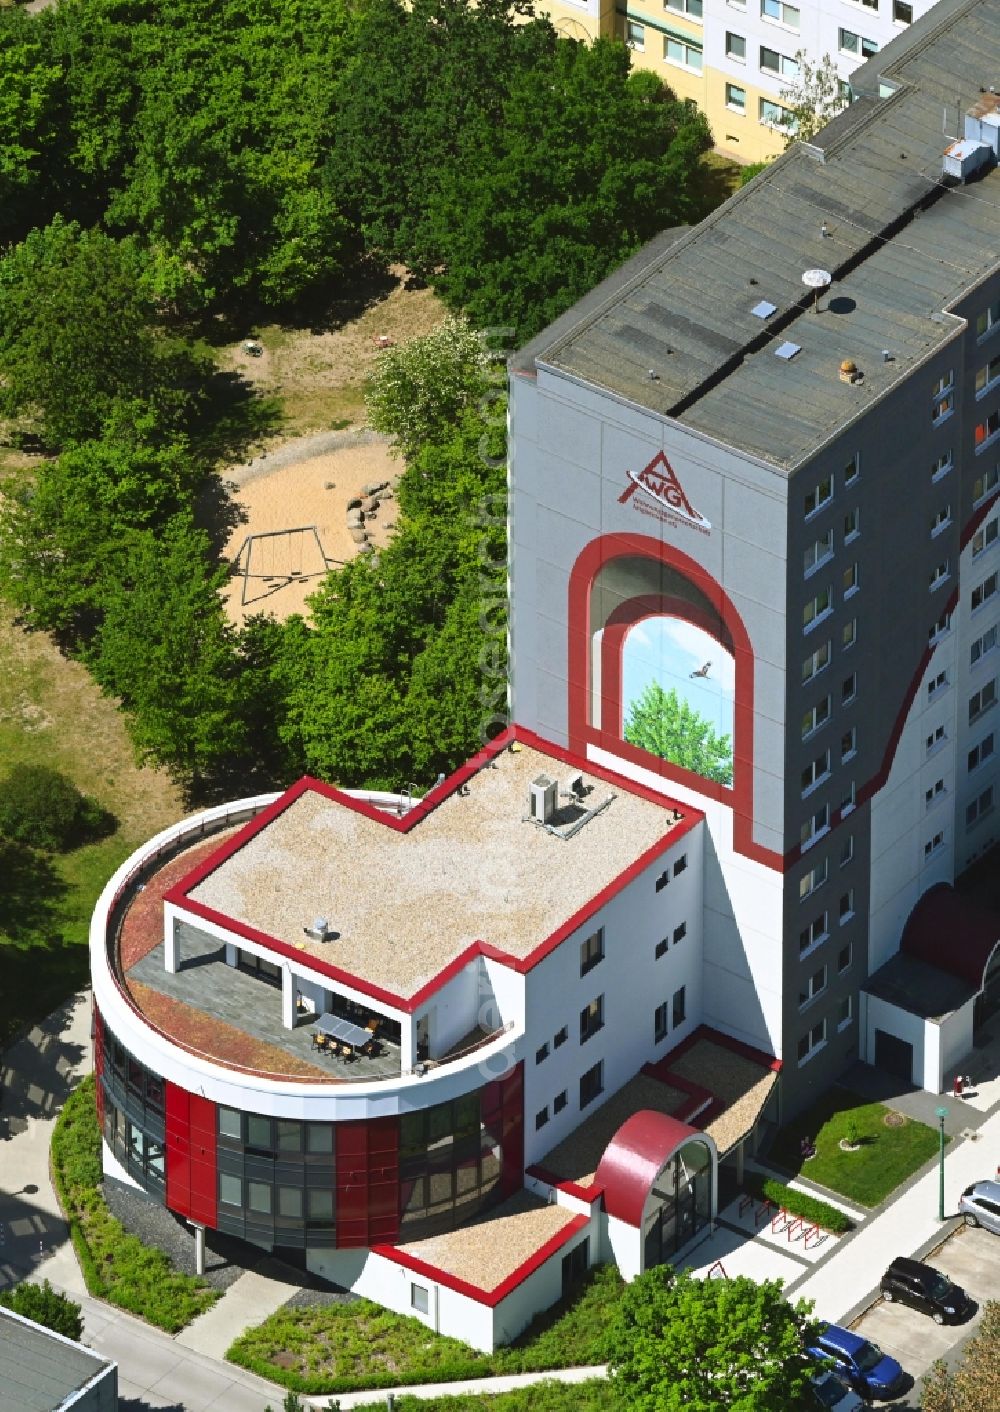 Aerial image Berlin - Office and administration building of the housing association and rental apartment provider Wohnungsgenossenschaft Altglienicke eG on Schoenefelder Chaussee in the district Altglienicke in Berlin, Germany